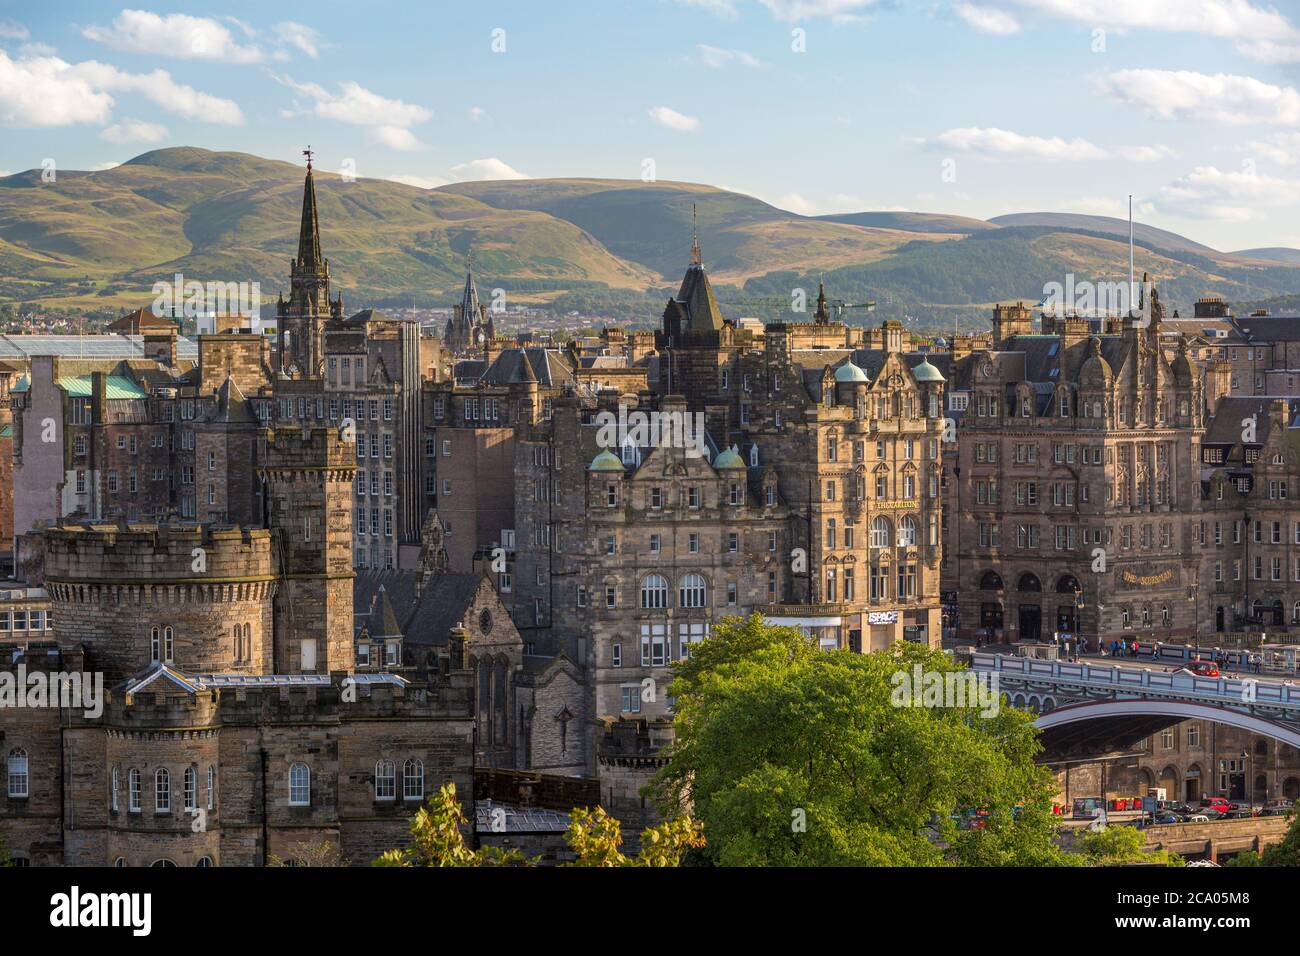 Old St Andrew's House and buildings of Edinburgh, Scotland Stock Photo